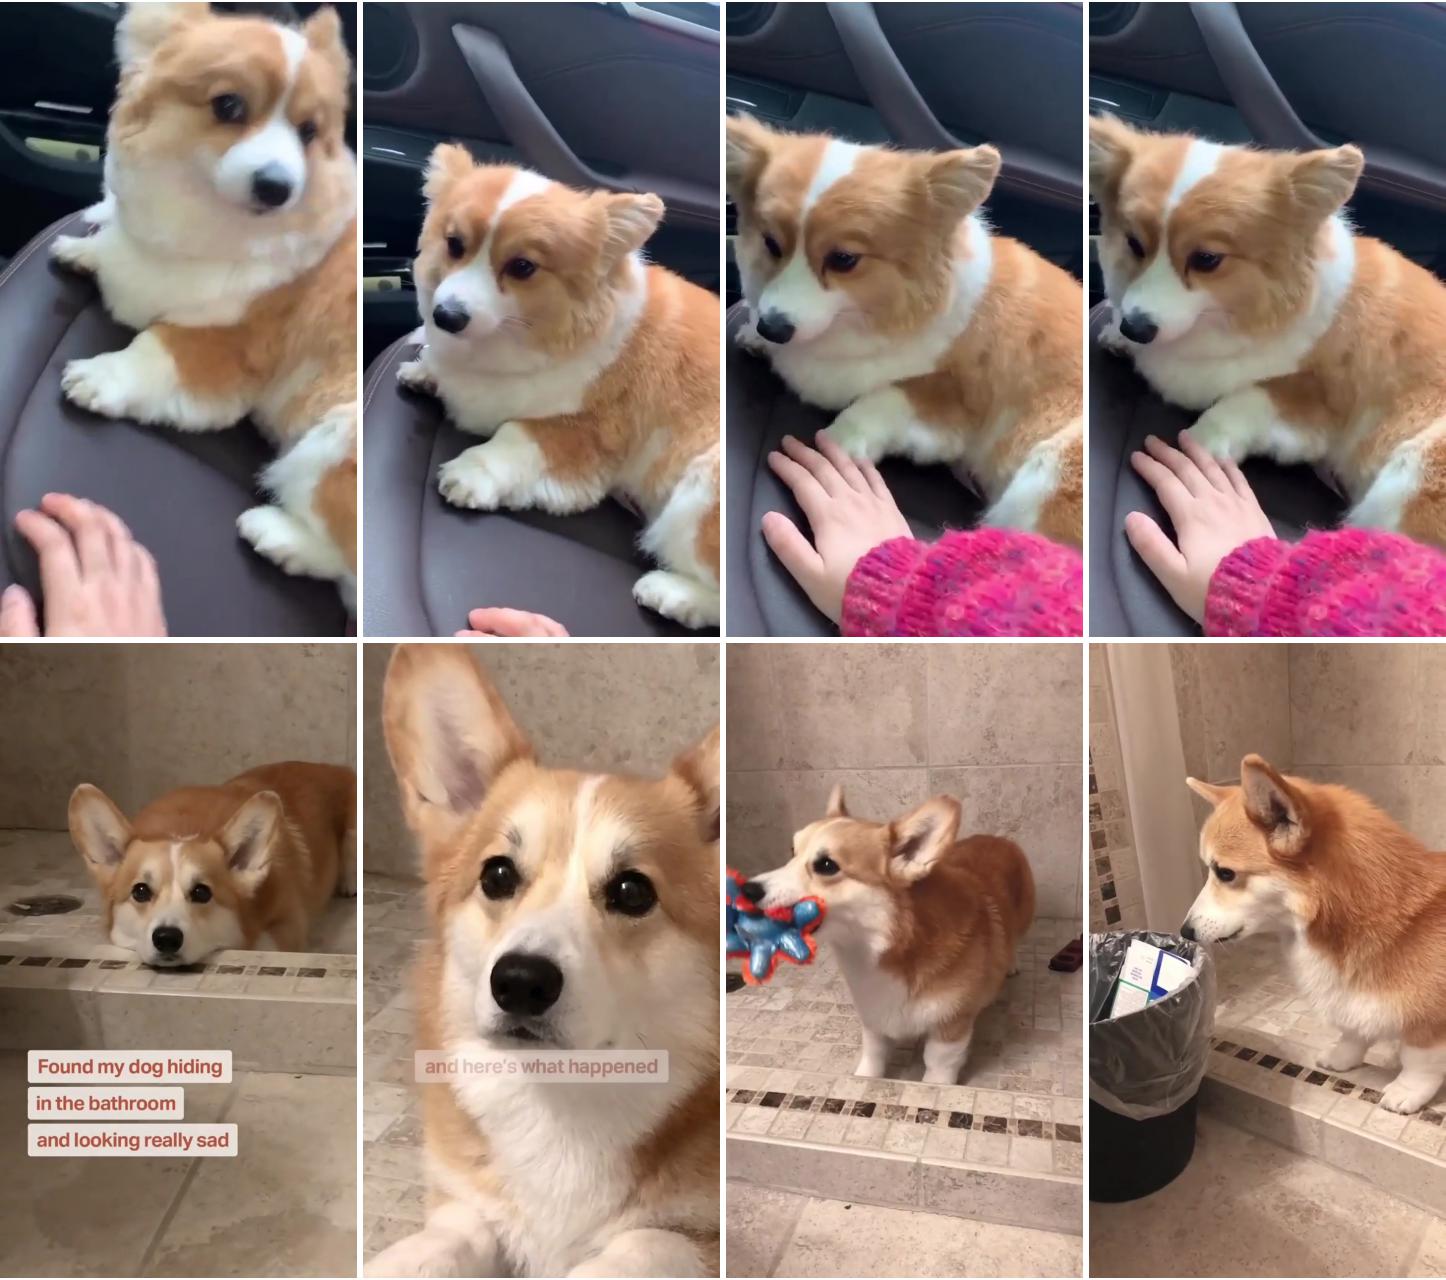 Adorable corgi puppy's nervous car ride - cute pet anxiety moments ; dog training